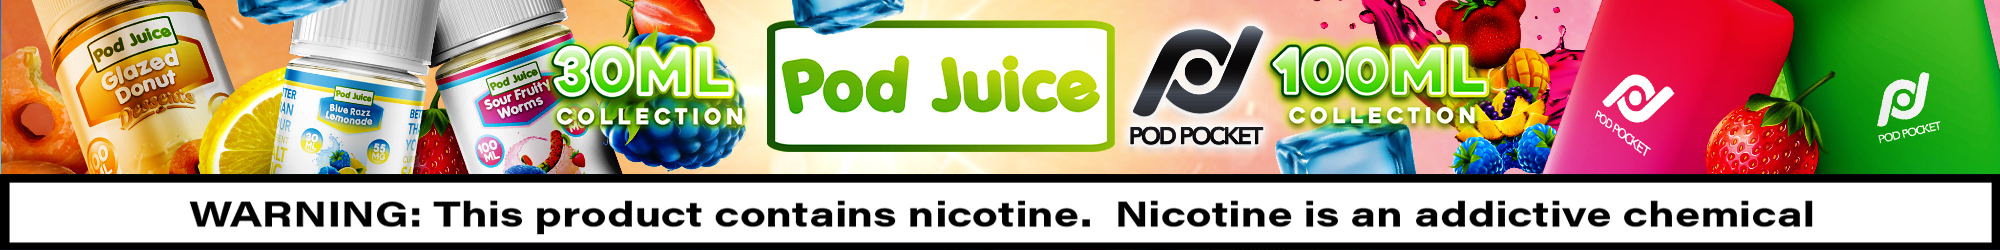 Pod Juice - 30 ML and 100 ML E-Juice Collections